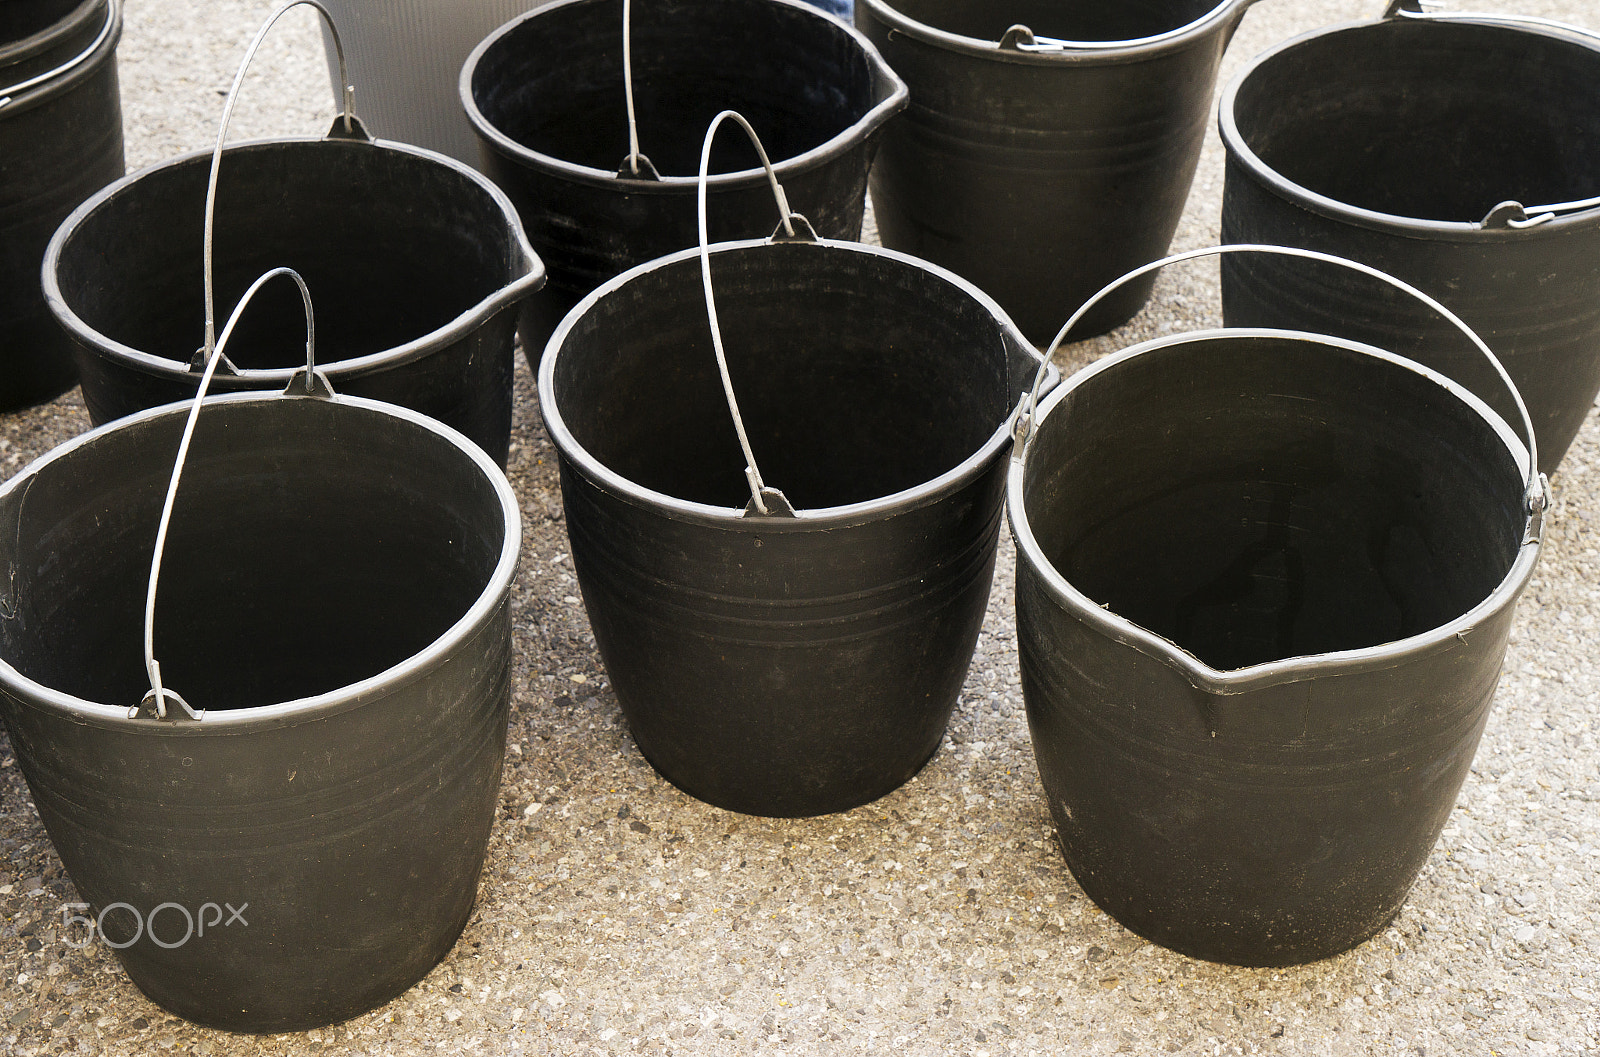 Sony a7 sample photo. The black buckets pails photography